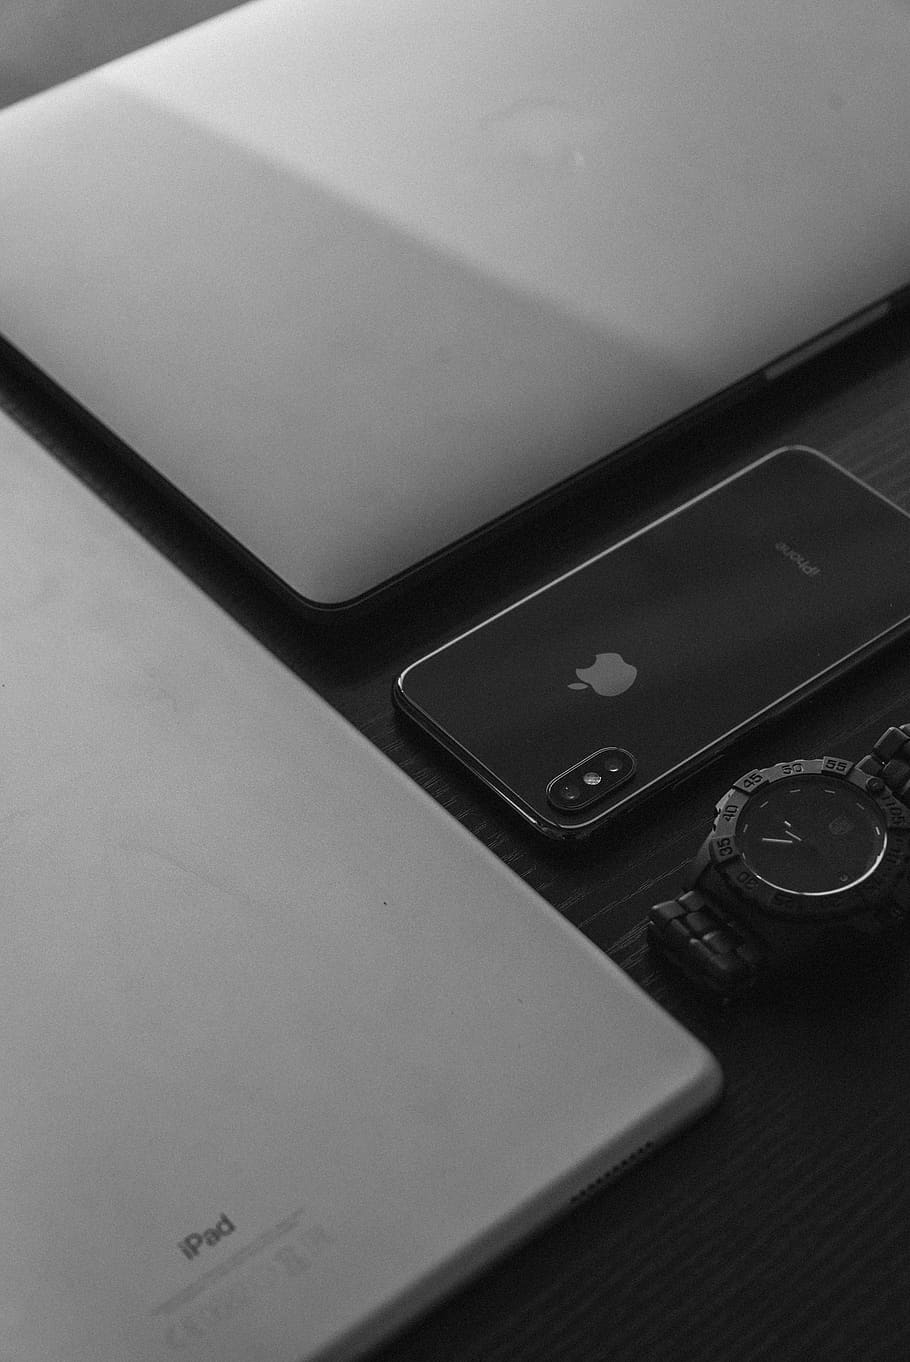 silver Apple MacBook, silver iPad, space gray iPhone X, and black analog watch, HD wallpaper